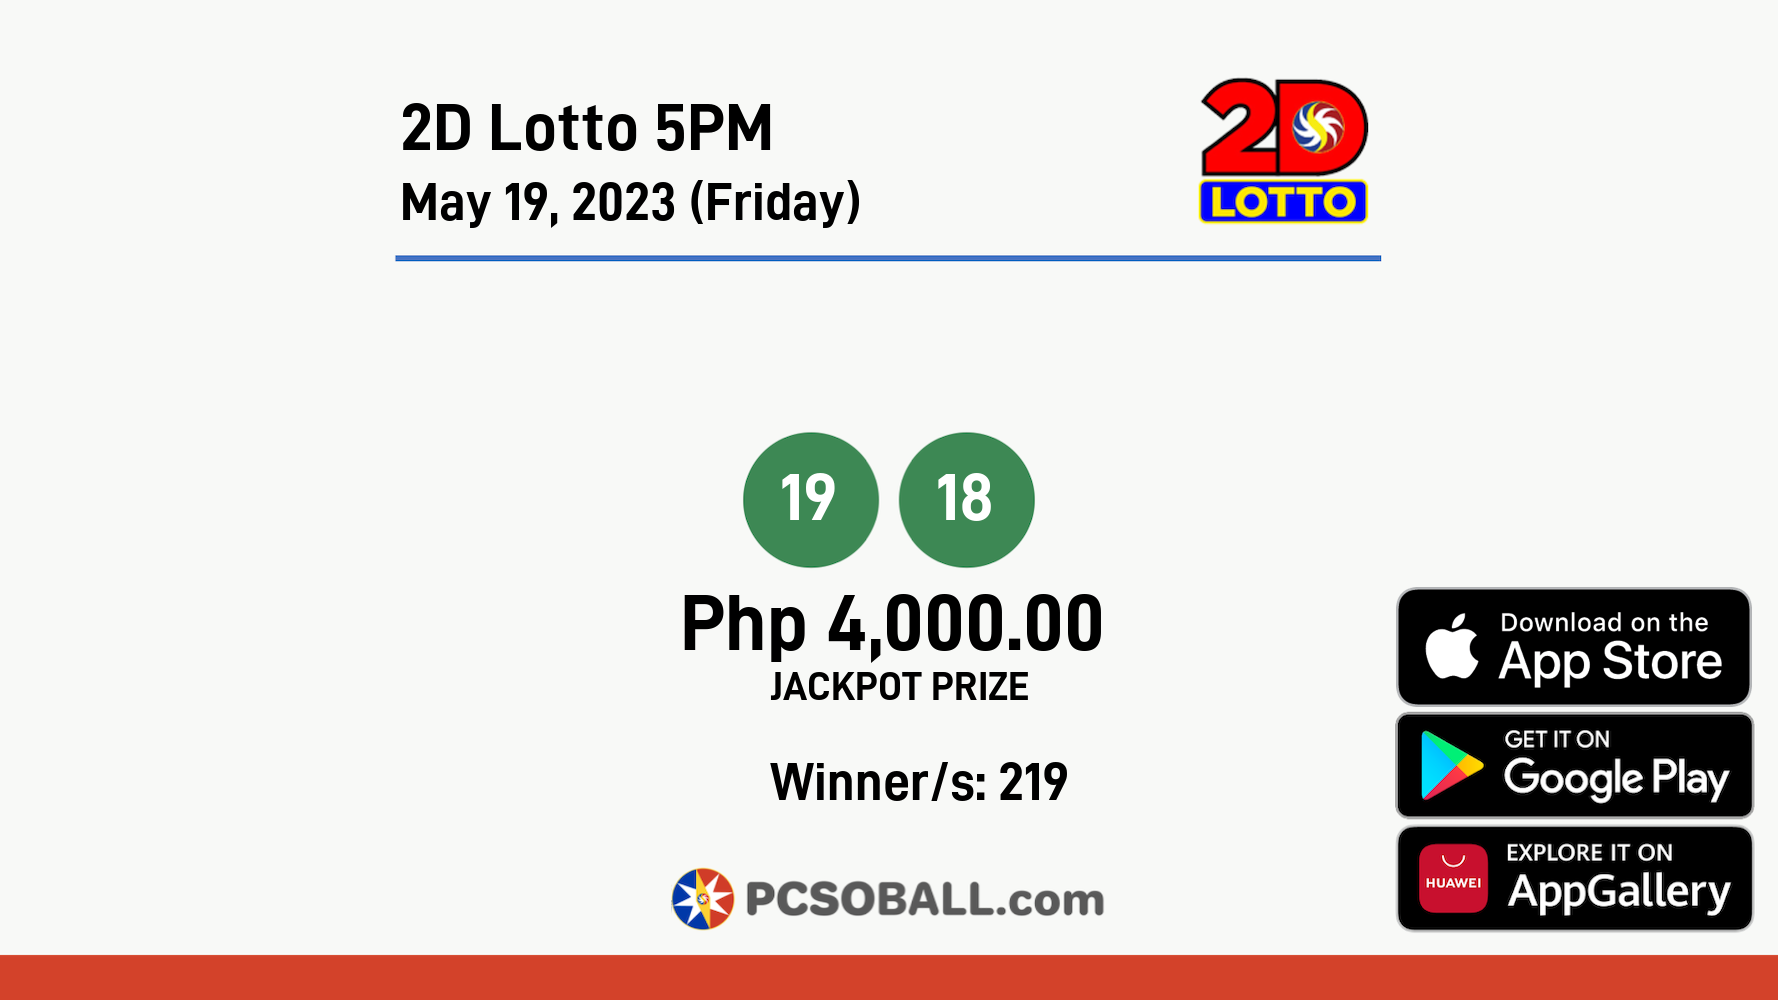 2D Lotto 5PM May 19, 2023 (Friday) Result